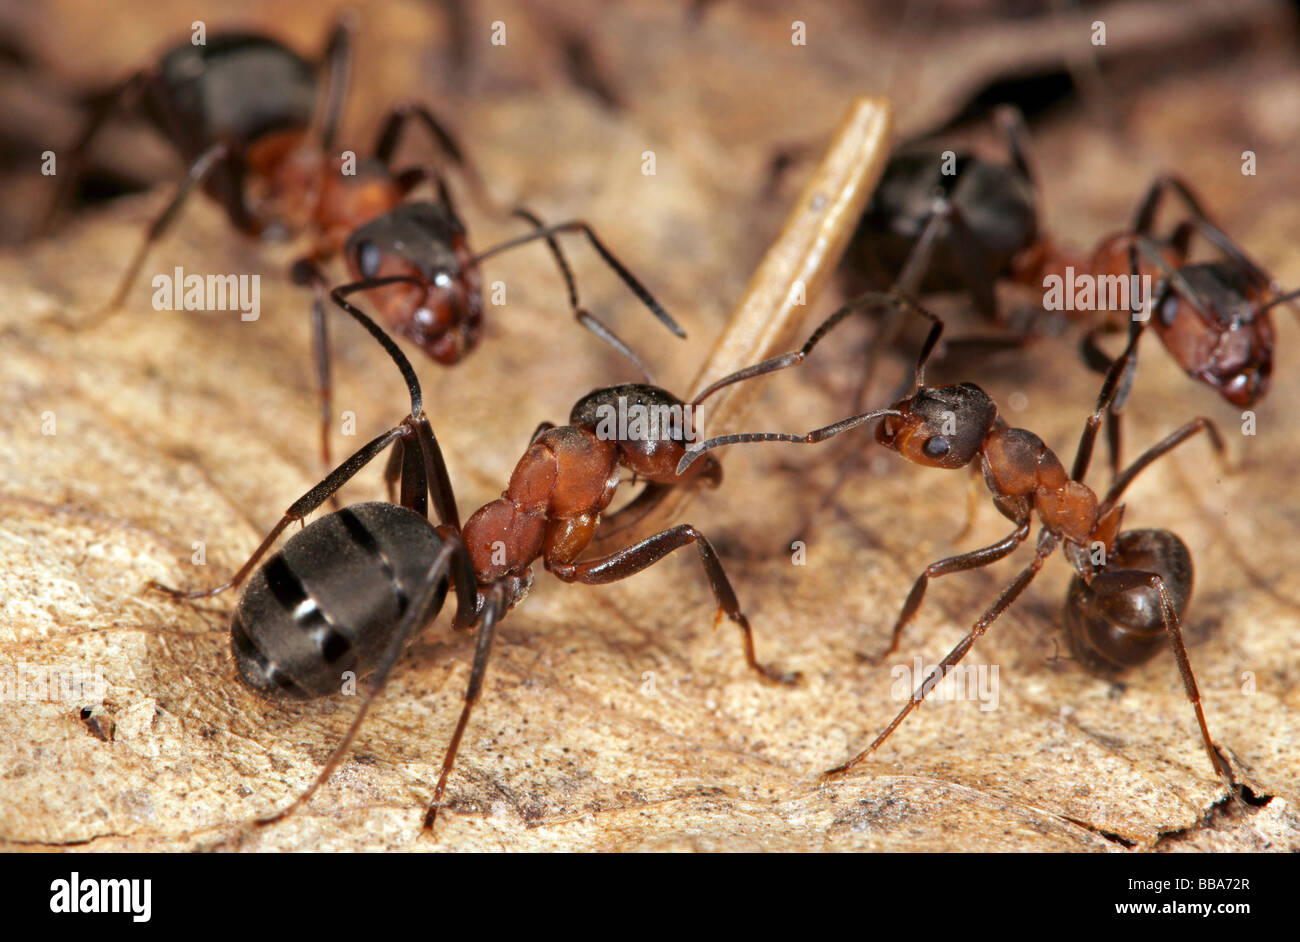 Red wood ants (Formica polyctena) Stock Photo